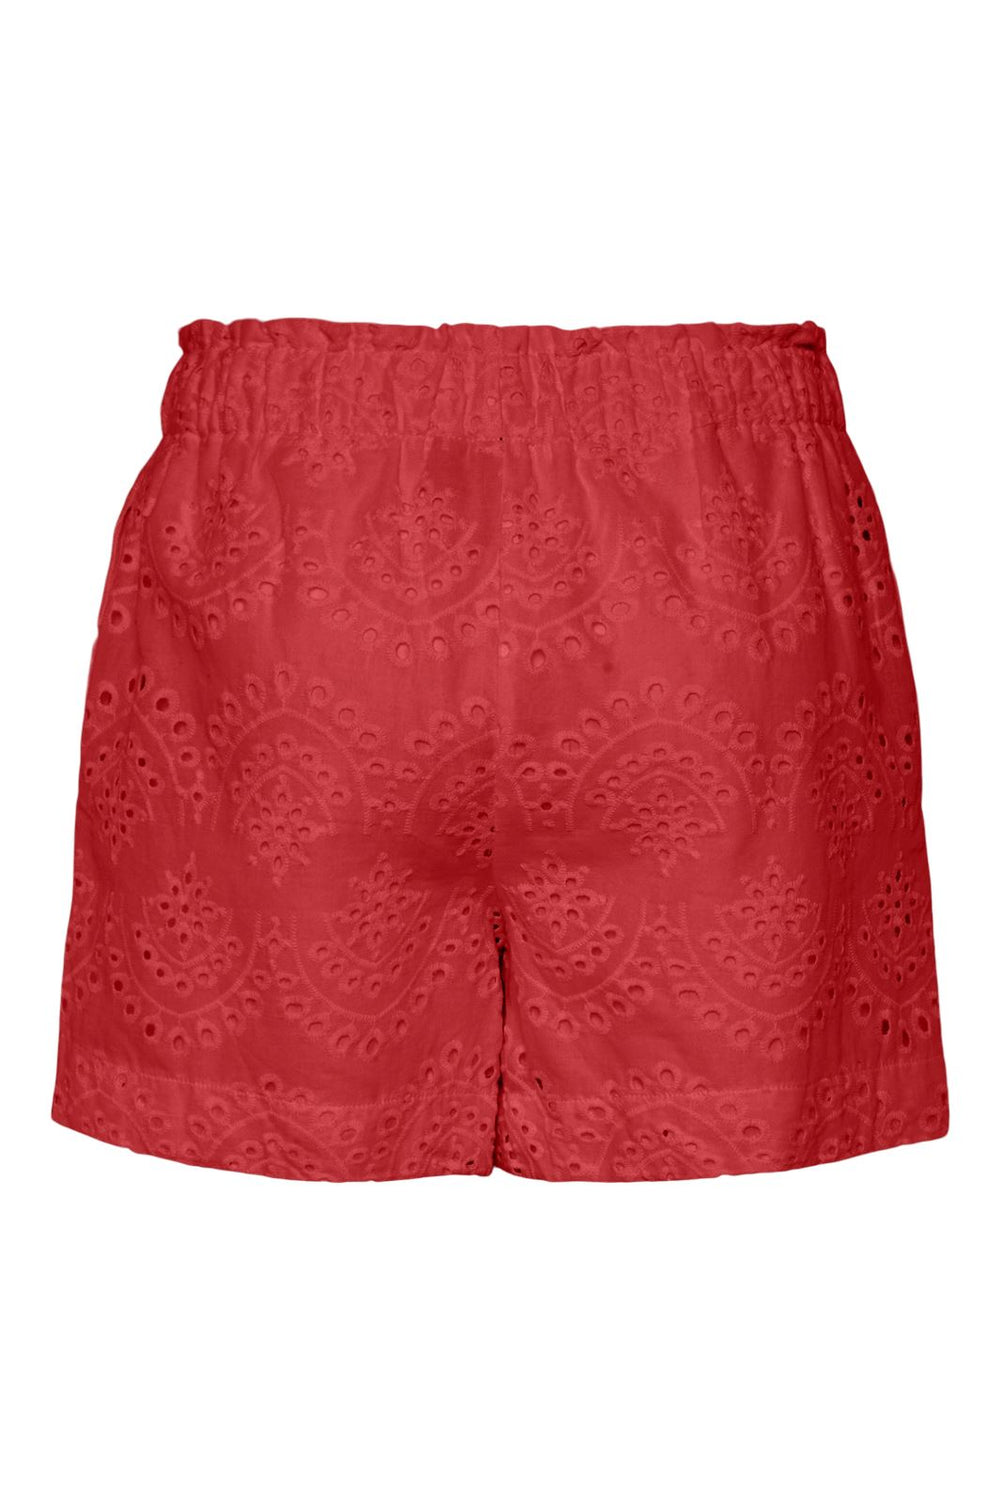 Pieces - Pcvilde Shorts - 4707645 Poppy Red